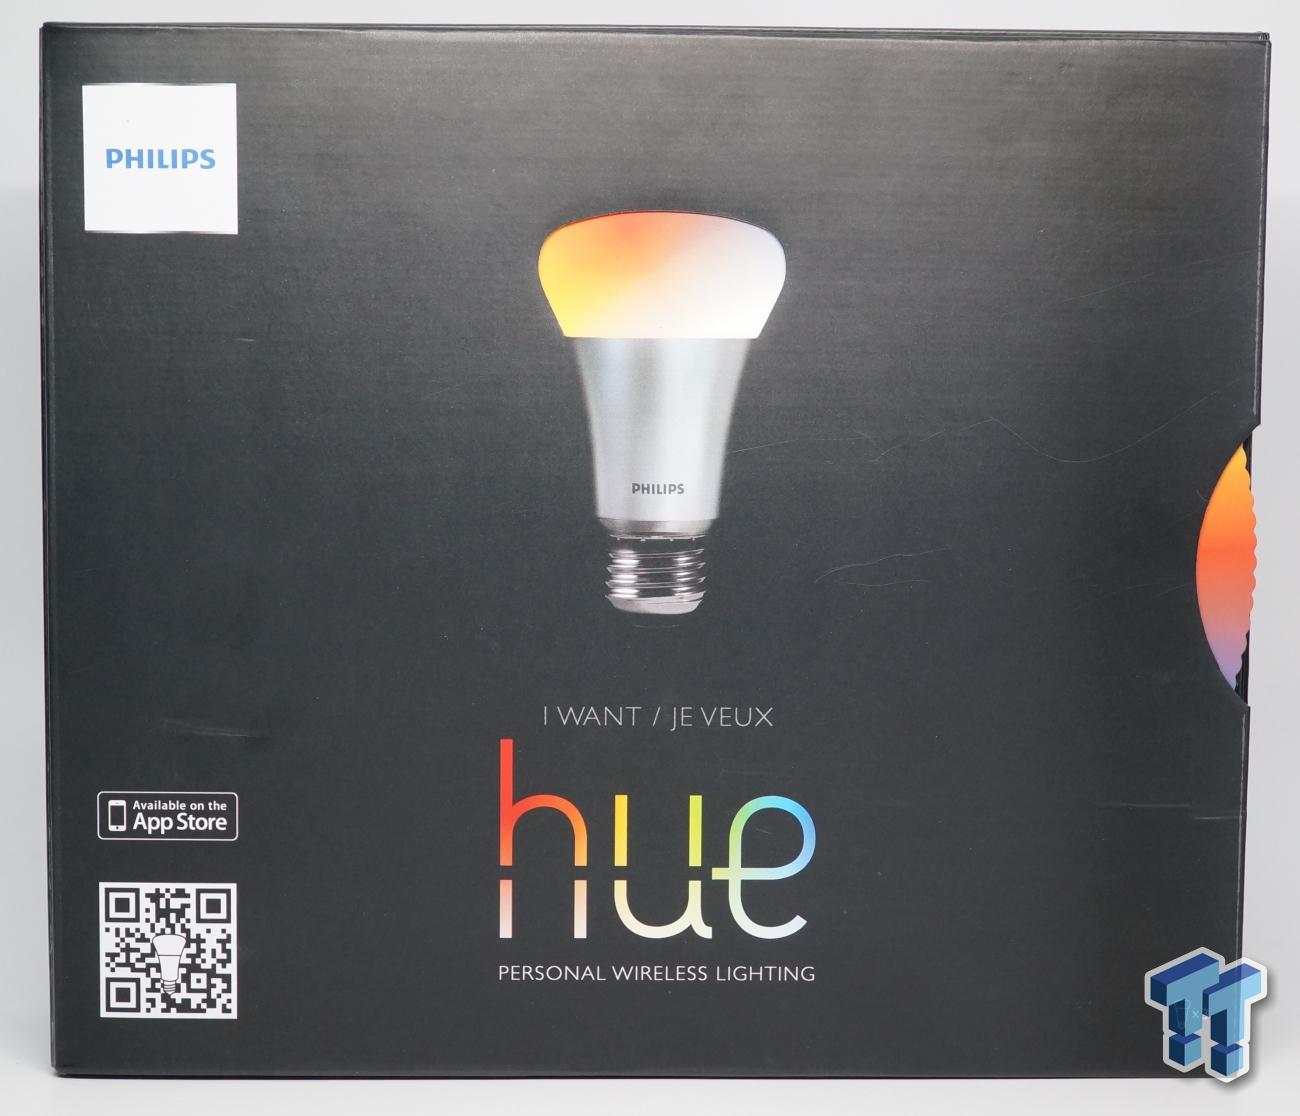 Philips Hue Personal Wireless Review - Light, Personal